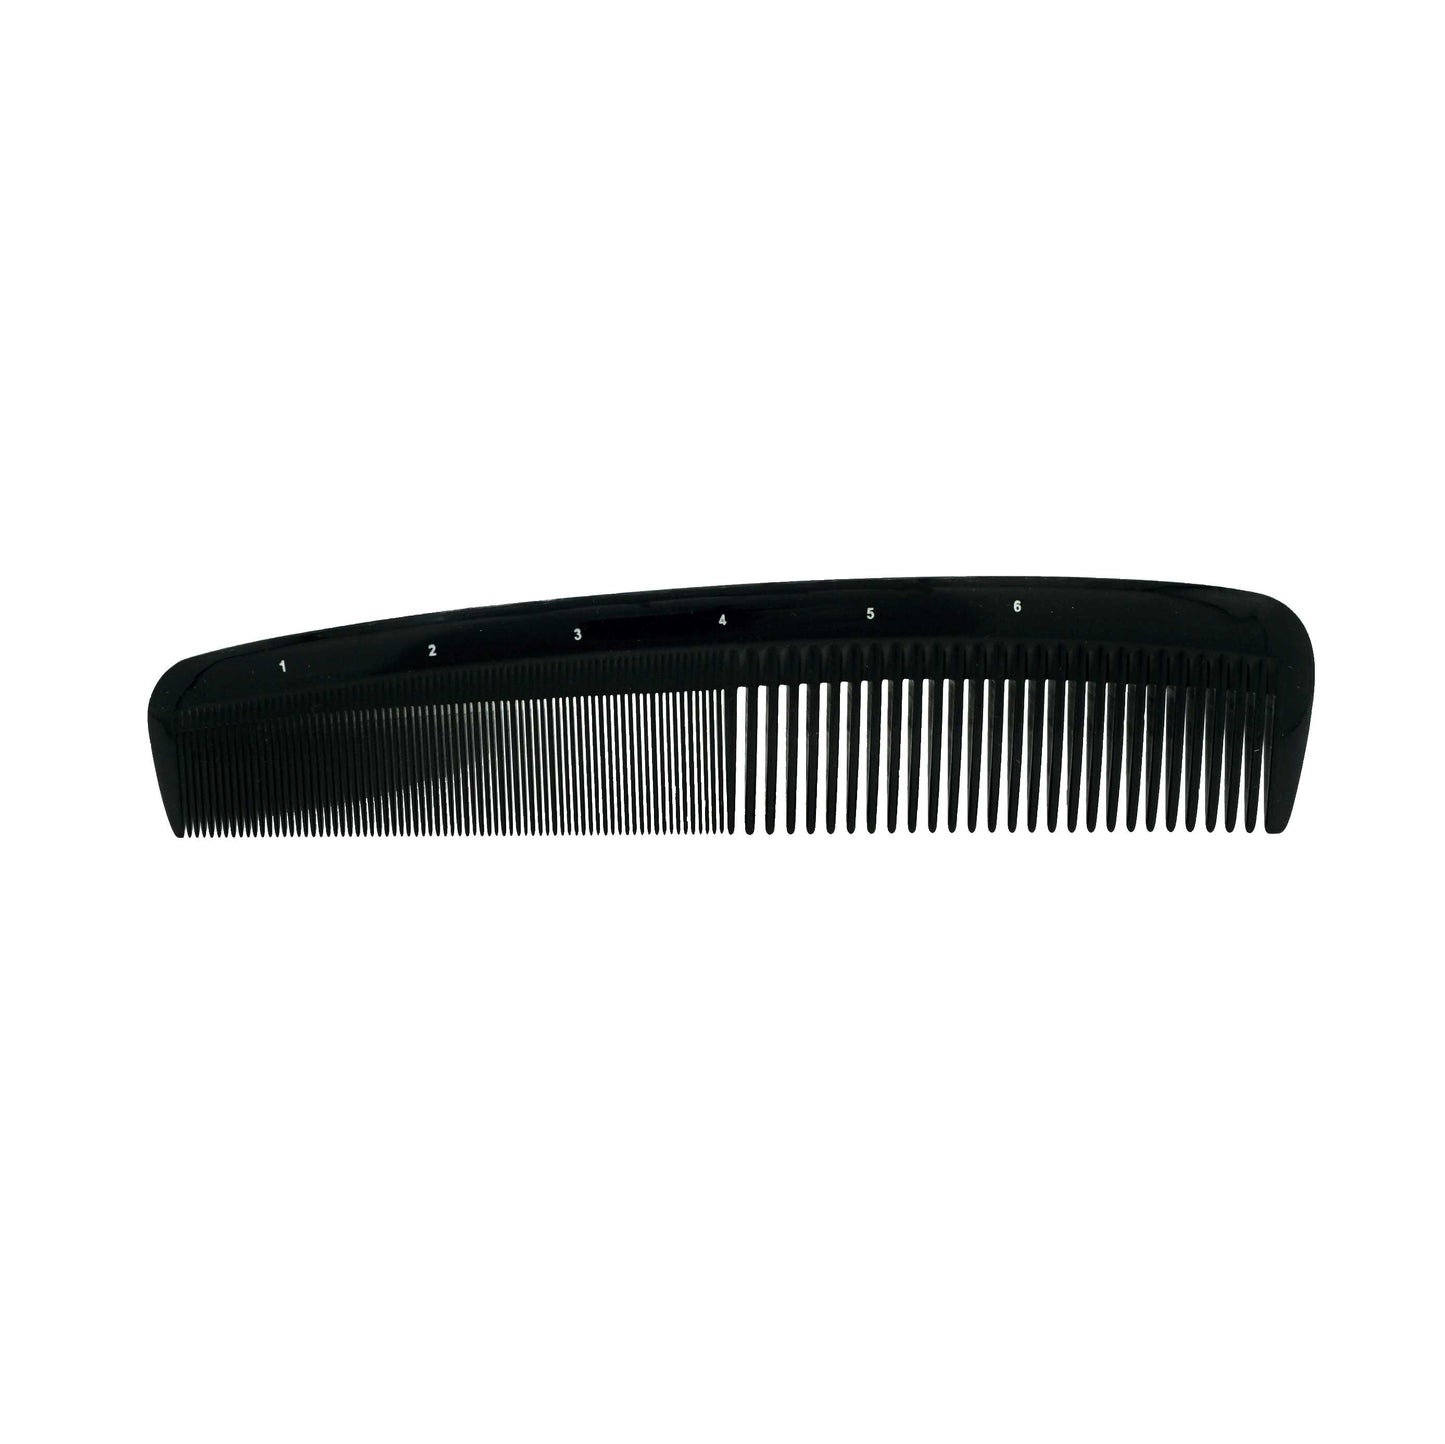 Pegasus 608, 8in Hard Rubber Heavy Styling Comb w Course/Extra Fine Teeth, Smooth Edges, Anti Static, Heat and Chemically Resistant, Portable Pocket Purse Dresser Comb | Peines de goma dura - Black